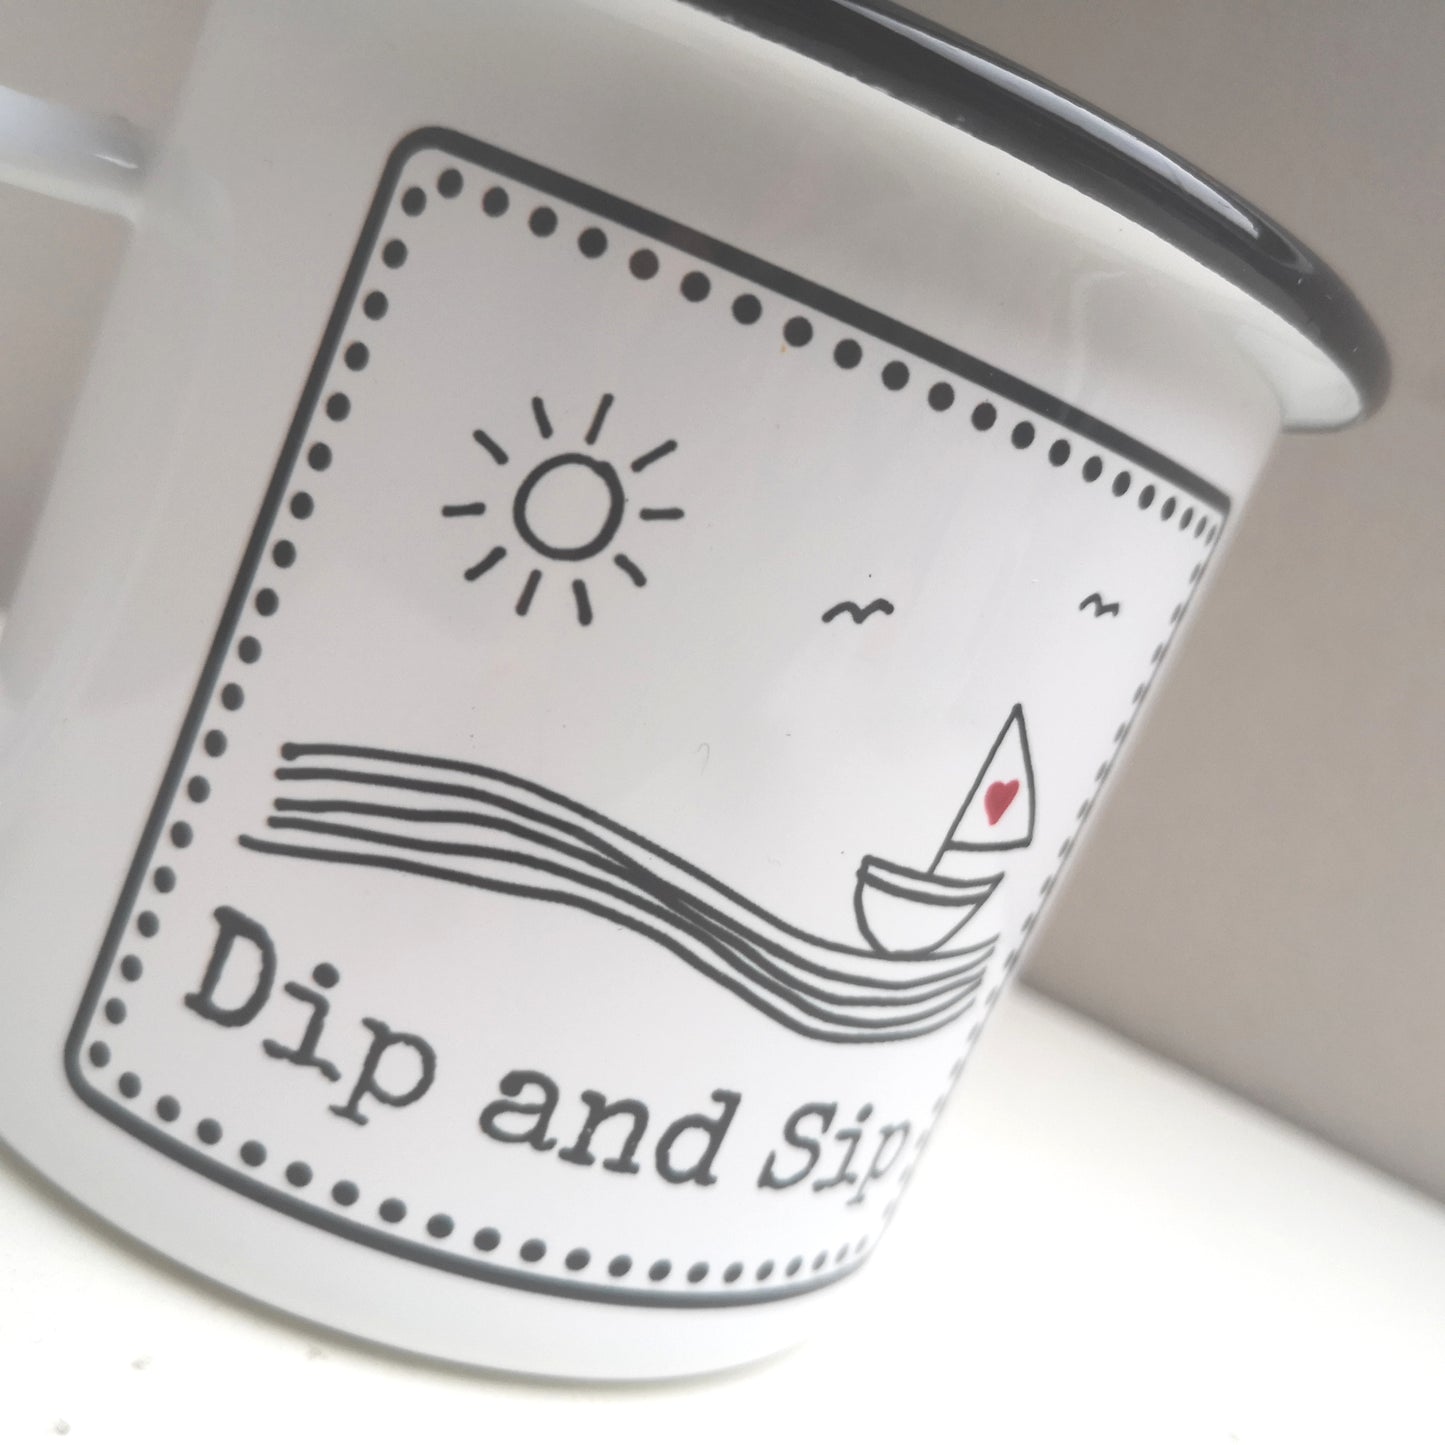 A white steel enamel mug with a year round swimmer's mantra on it - dip and sip. Photo shows a close up of the black and white design with a sailboat